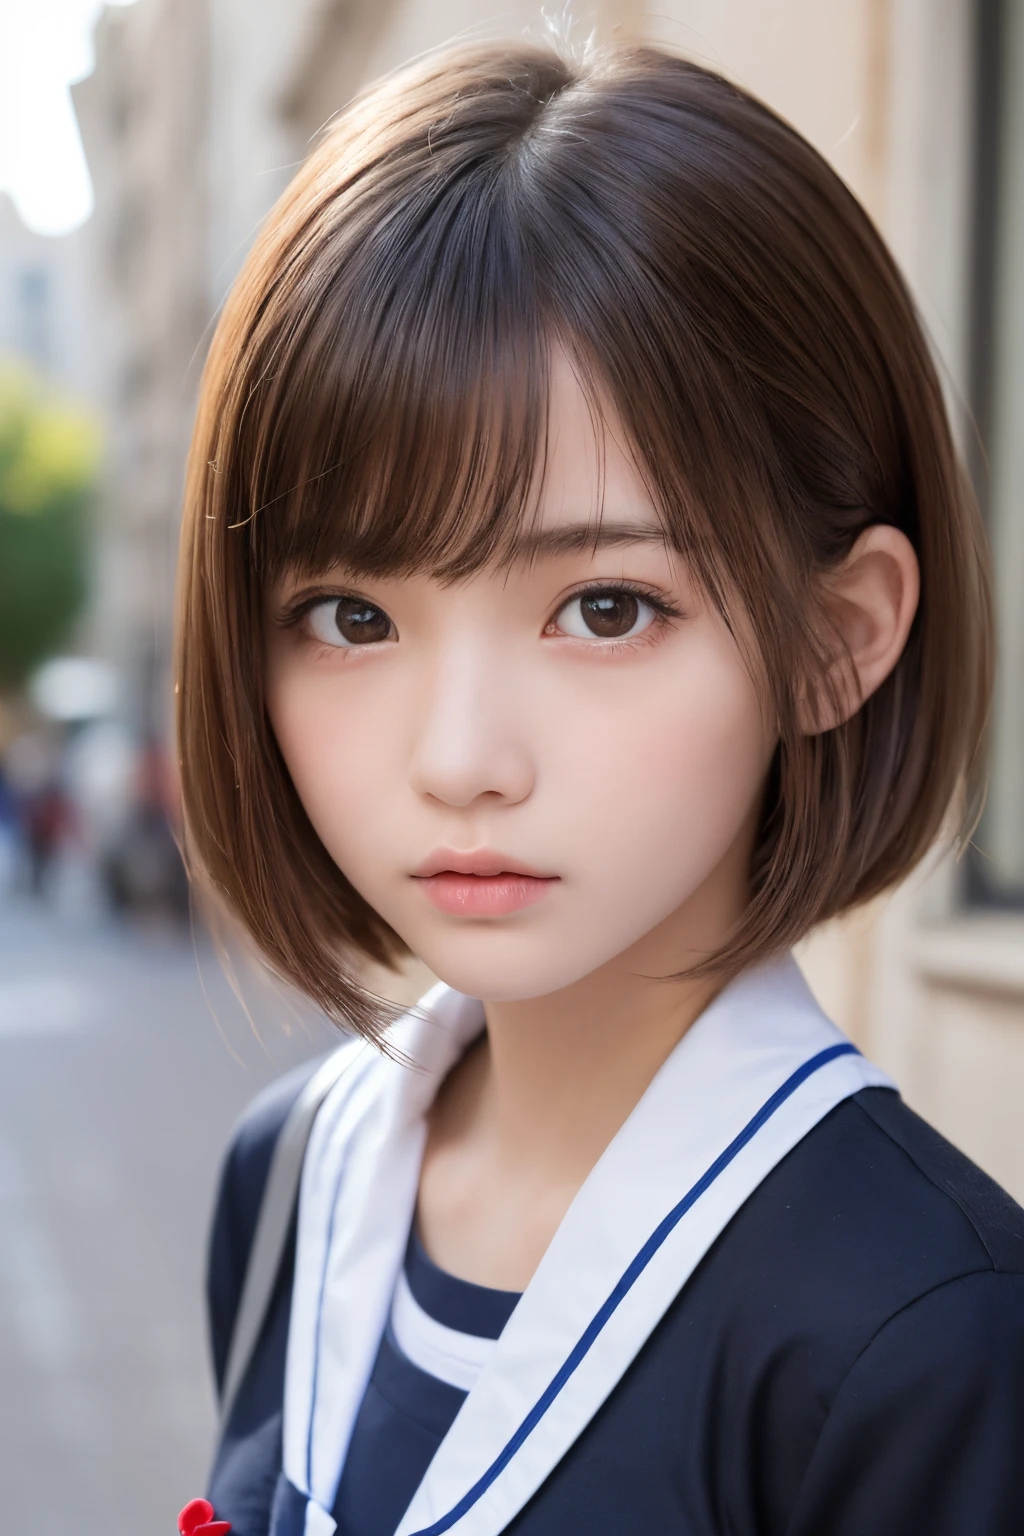 masterpiece, Best Quality, One girl, (a beauty girl, Delicate girl:1.3), (15 years old:1.3), Very fine eye definition, (Symmetrical eyes:1.3), (street view:1.2), (school uniform, serafuku:1.3), Small breasts, Brown eyes, Parted bangs, Brown hair,  girl, (Eyes and faces with detailed:1.0), (close up to face, zoom in face, face focus:1.0)